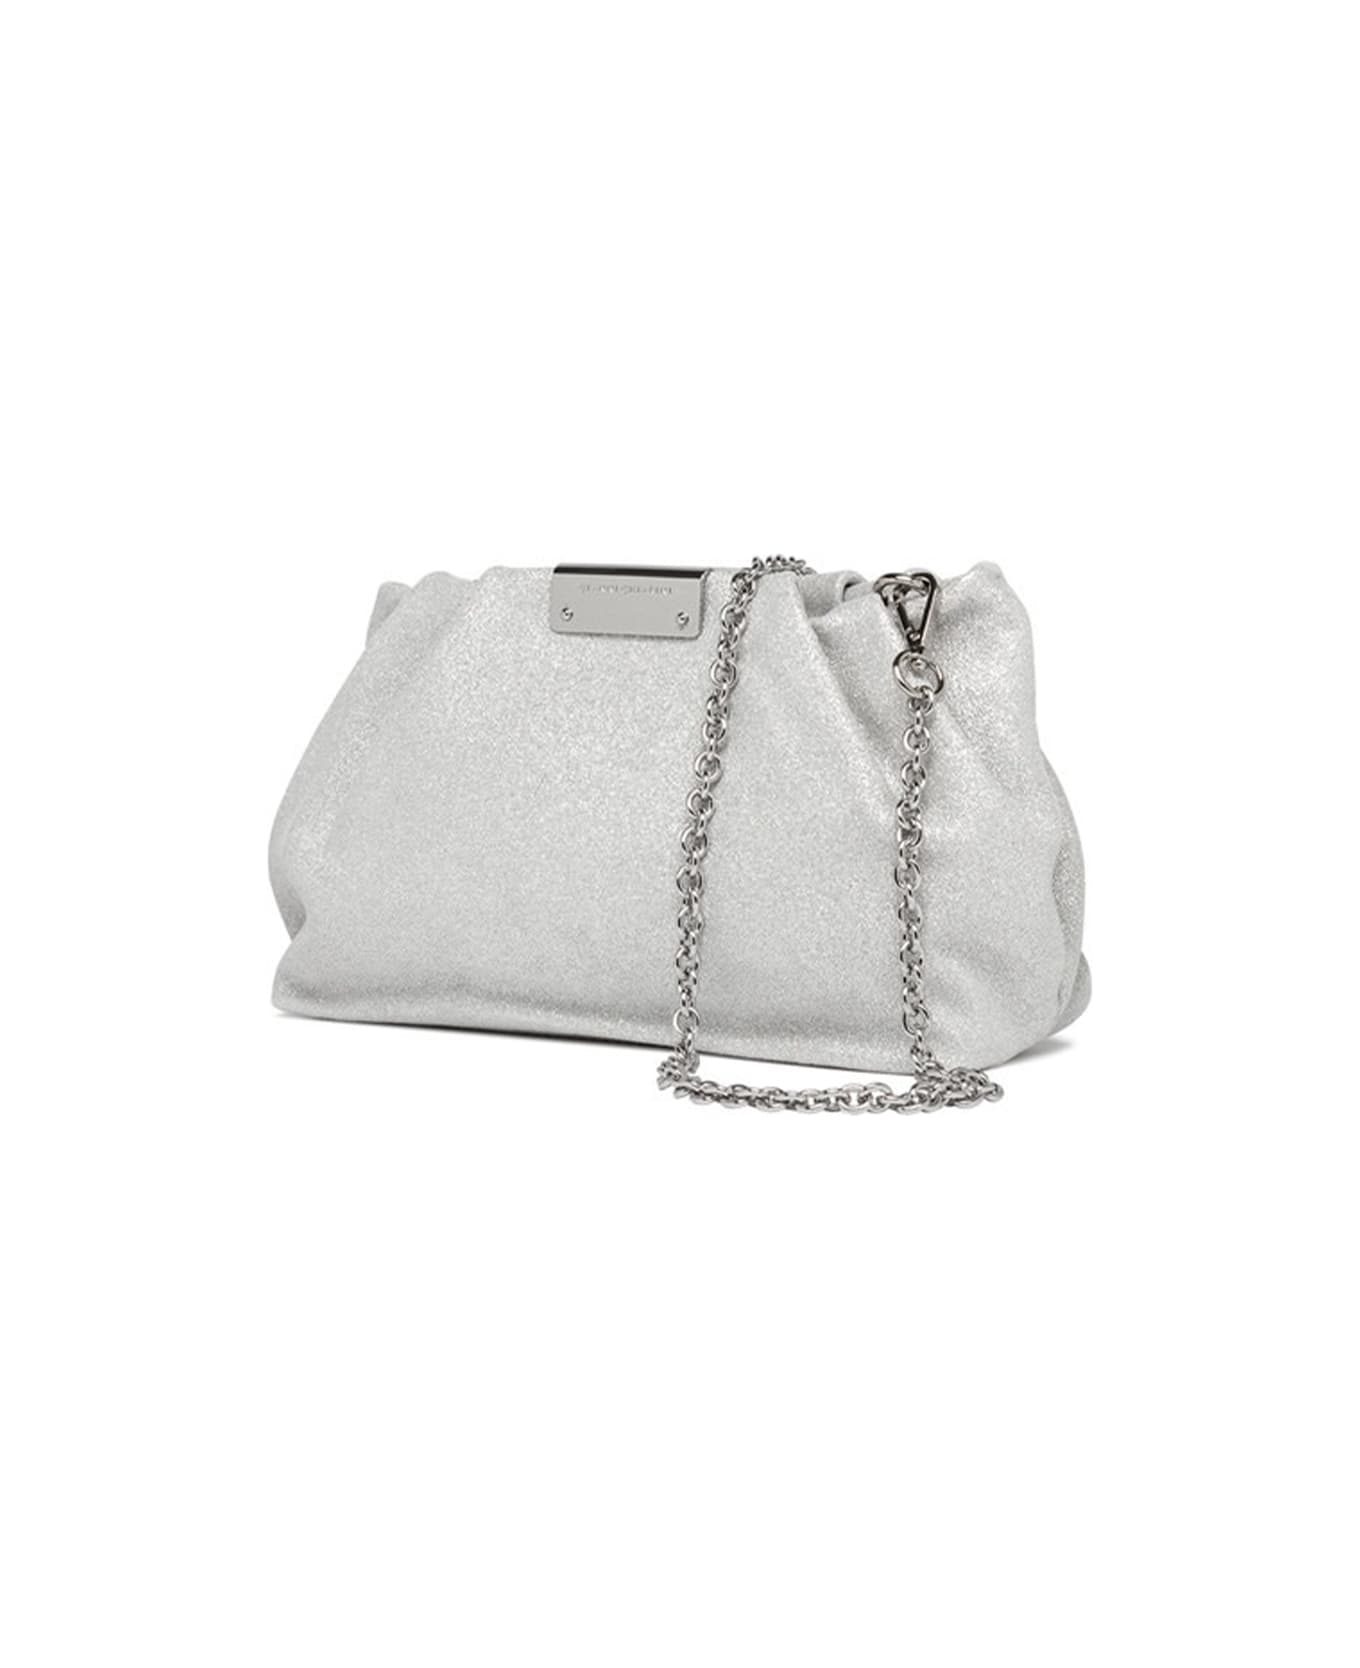 Gianni Chiarini Silver Glitter Pearl Clutch Bag With Curled Effect - SILVER